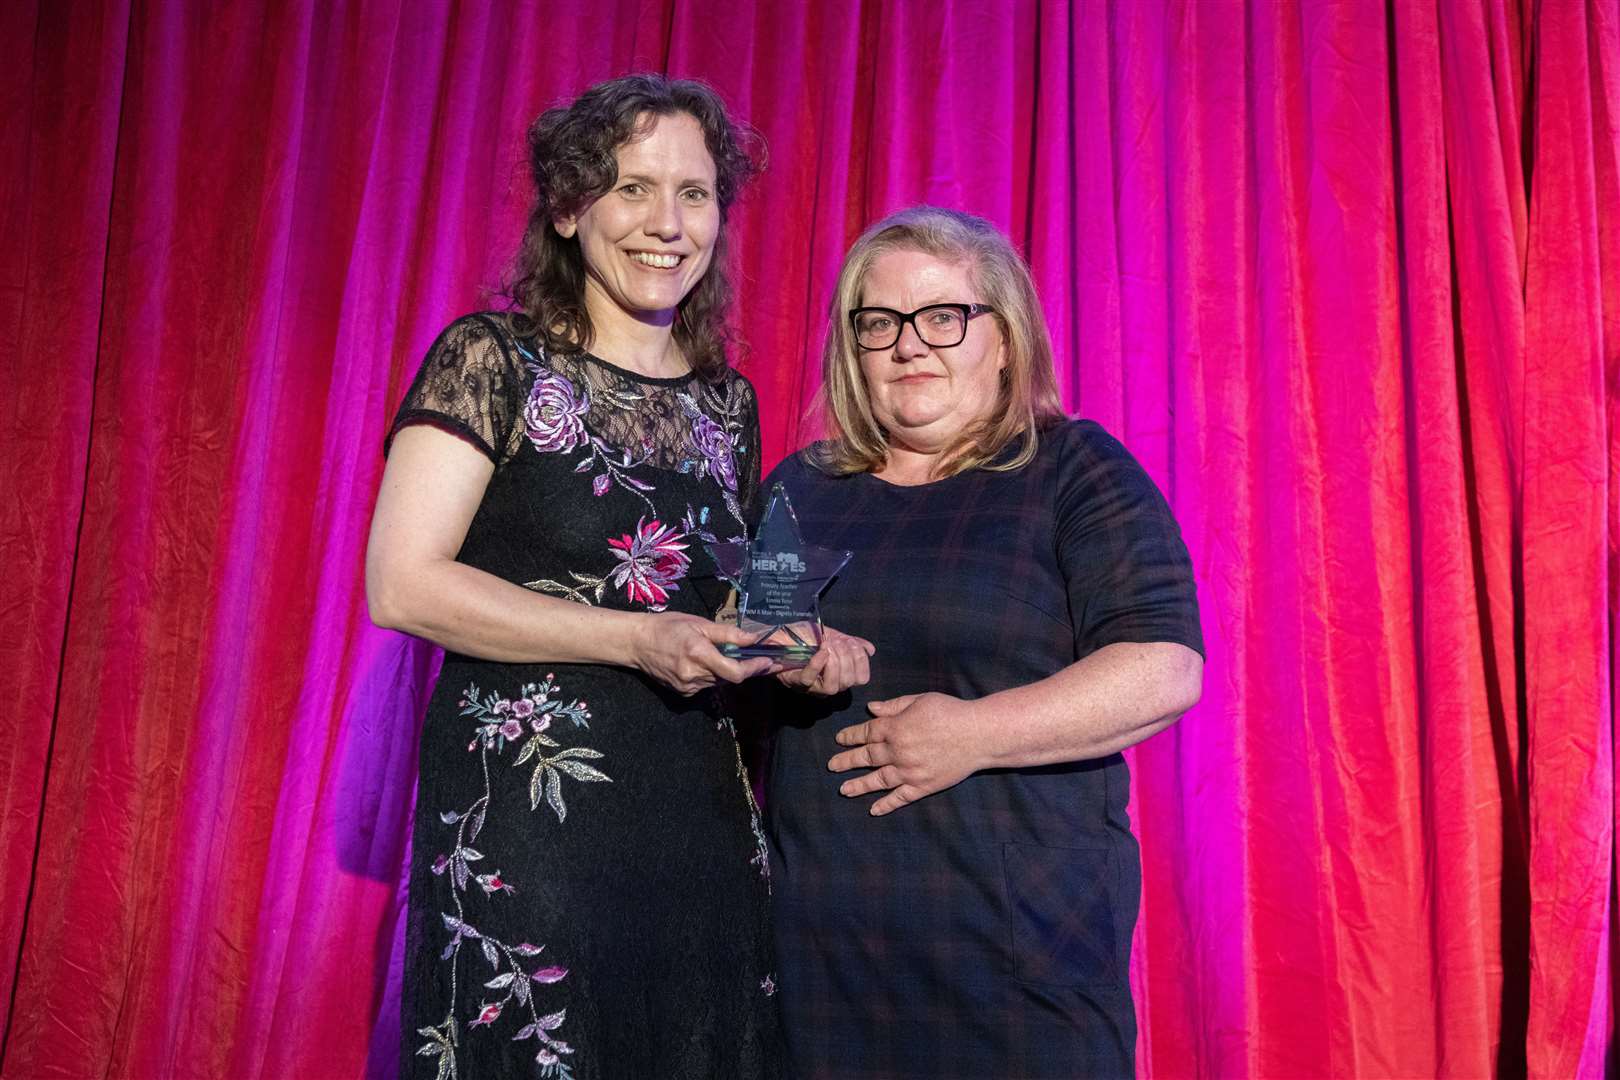 Emma Rose was awarded Primary Teacher of the Year at last year's Moray and Banffshire Heroes Awards. Picture: Beth Taylor